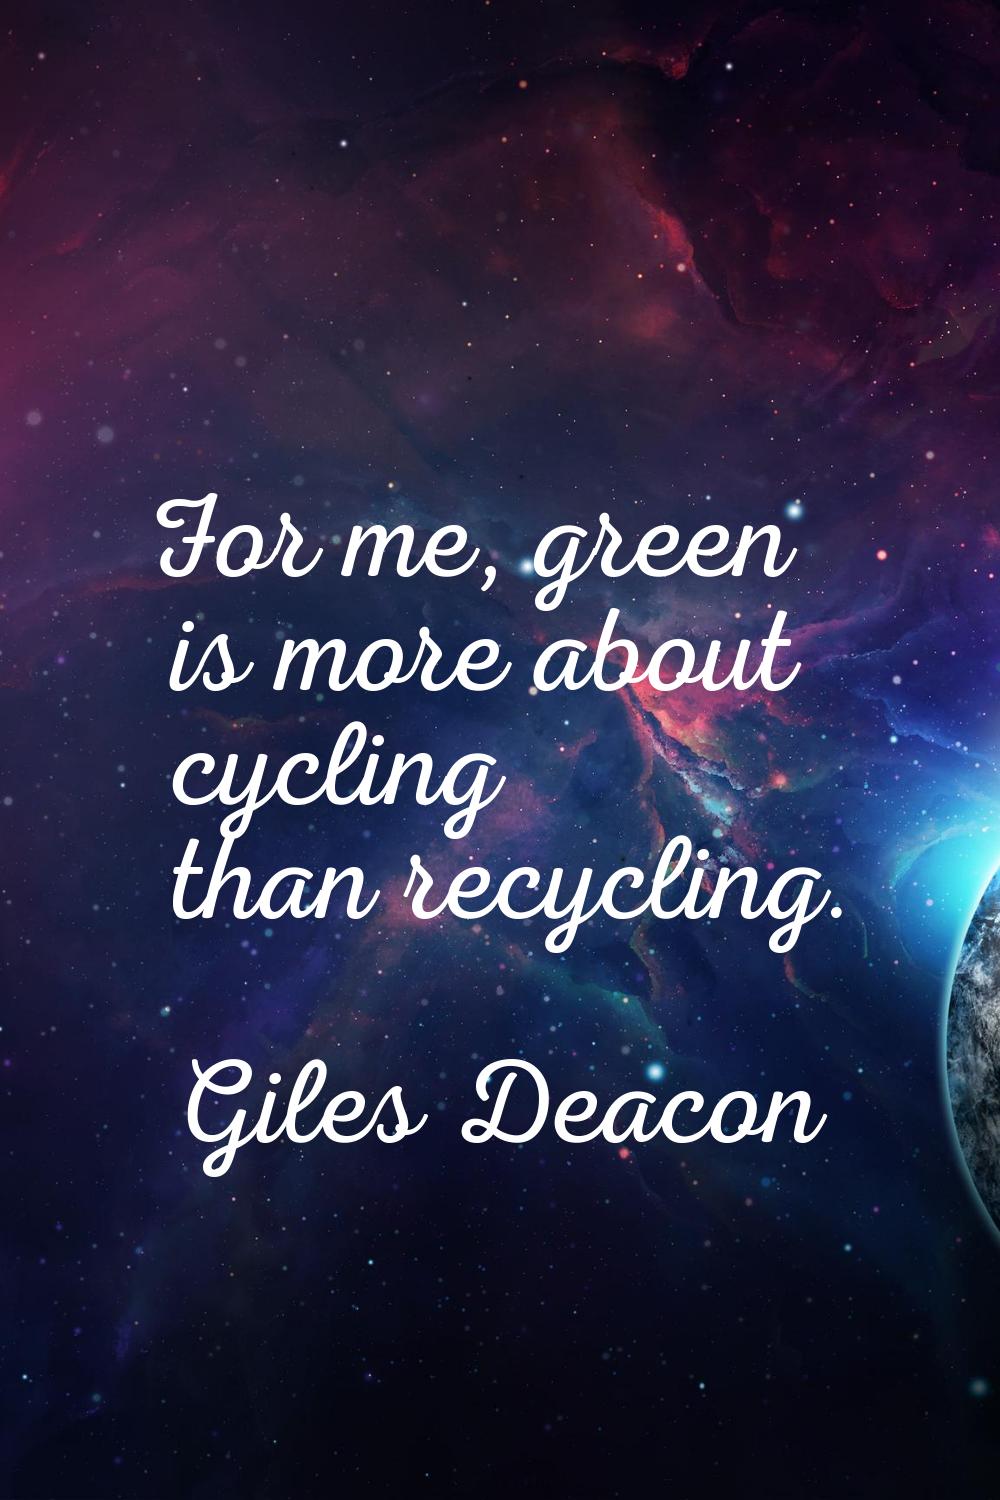 For me, green is more about cycling than recycling.